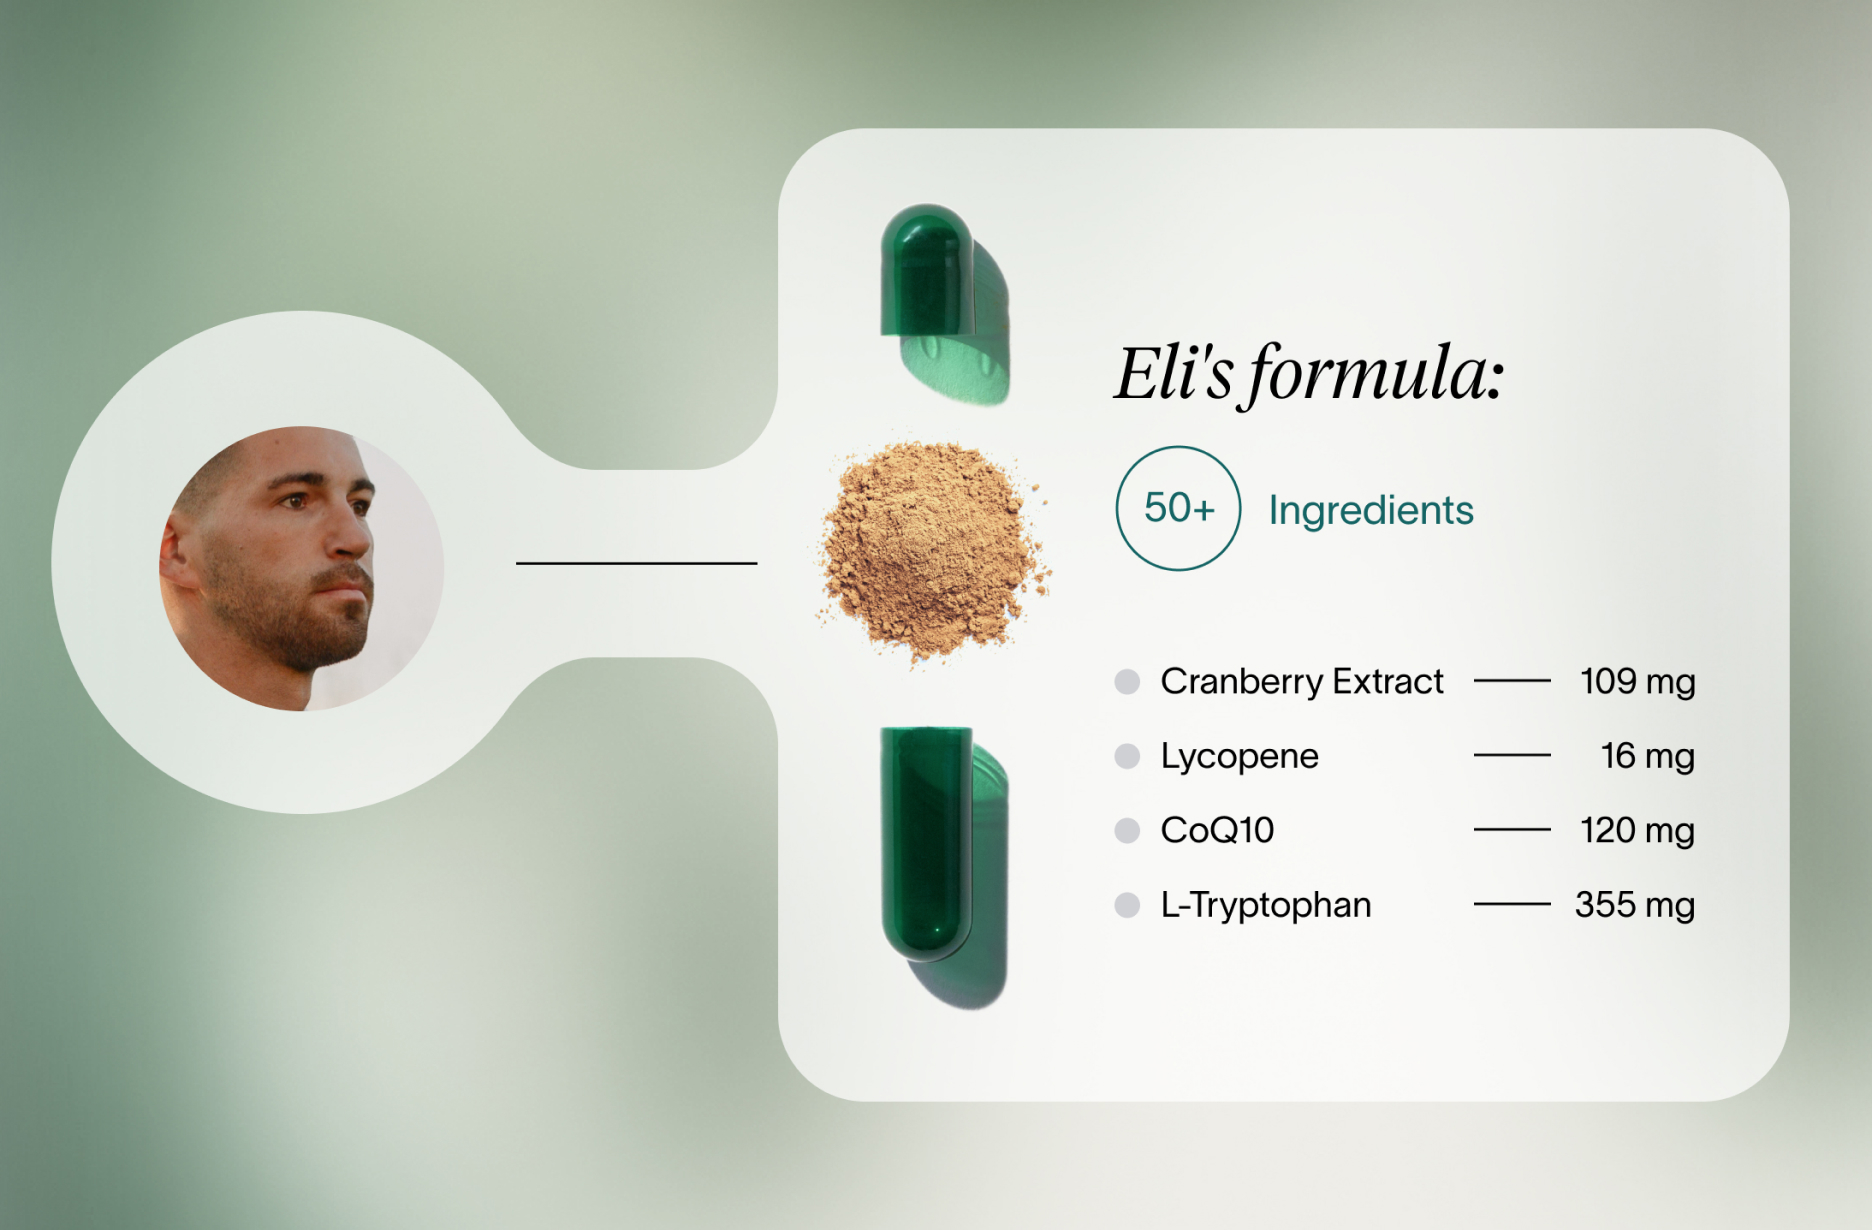 A visual depiction of an example customer’s personalized supplement formula, comprised of 50+ ingredients 